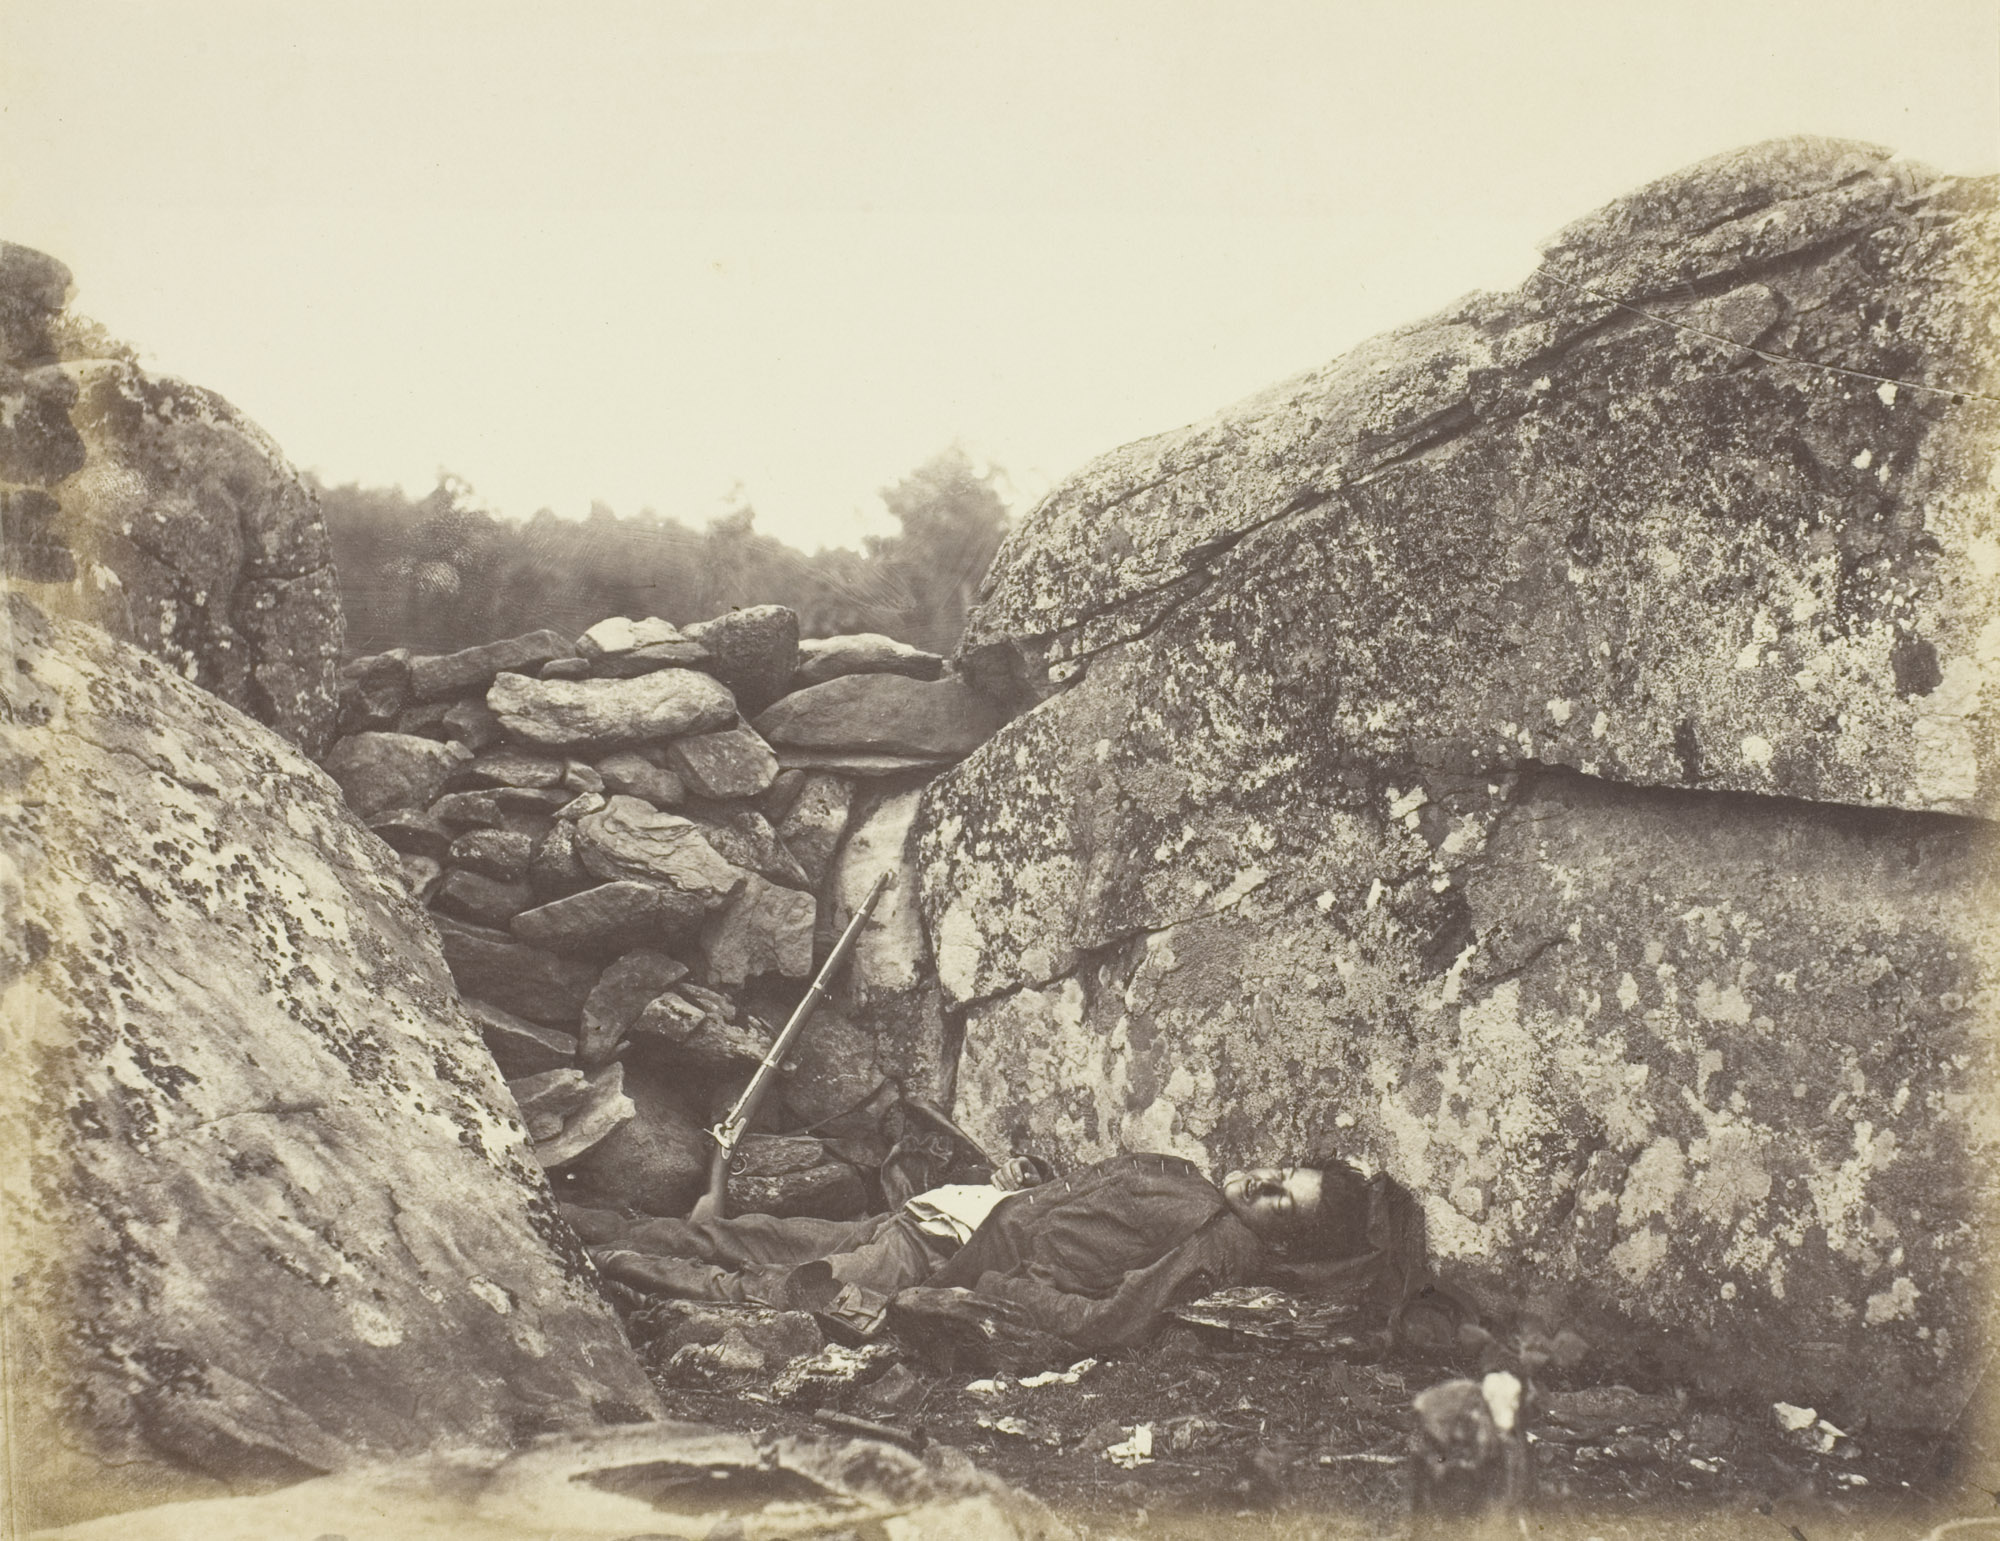 Alexander Gardner, Home of a Rebel Sharpshooter, 1863, albumen print from collodion wet plate negative, 6 15/16 x 9 1/16 inches (The Art Institute of Chicago)